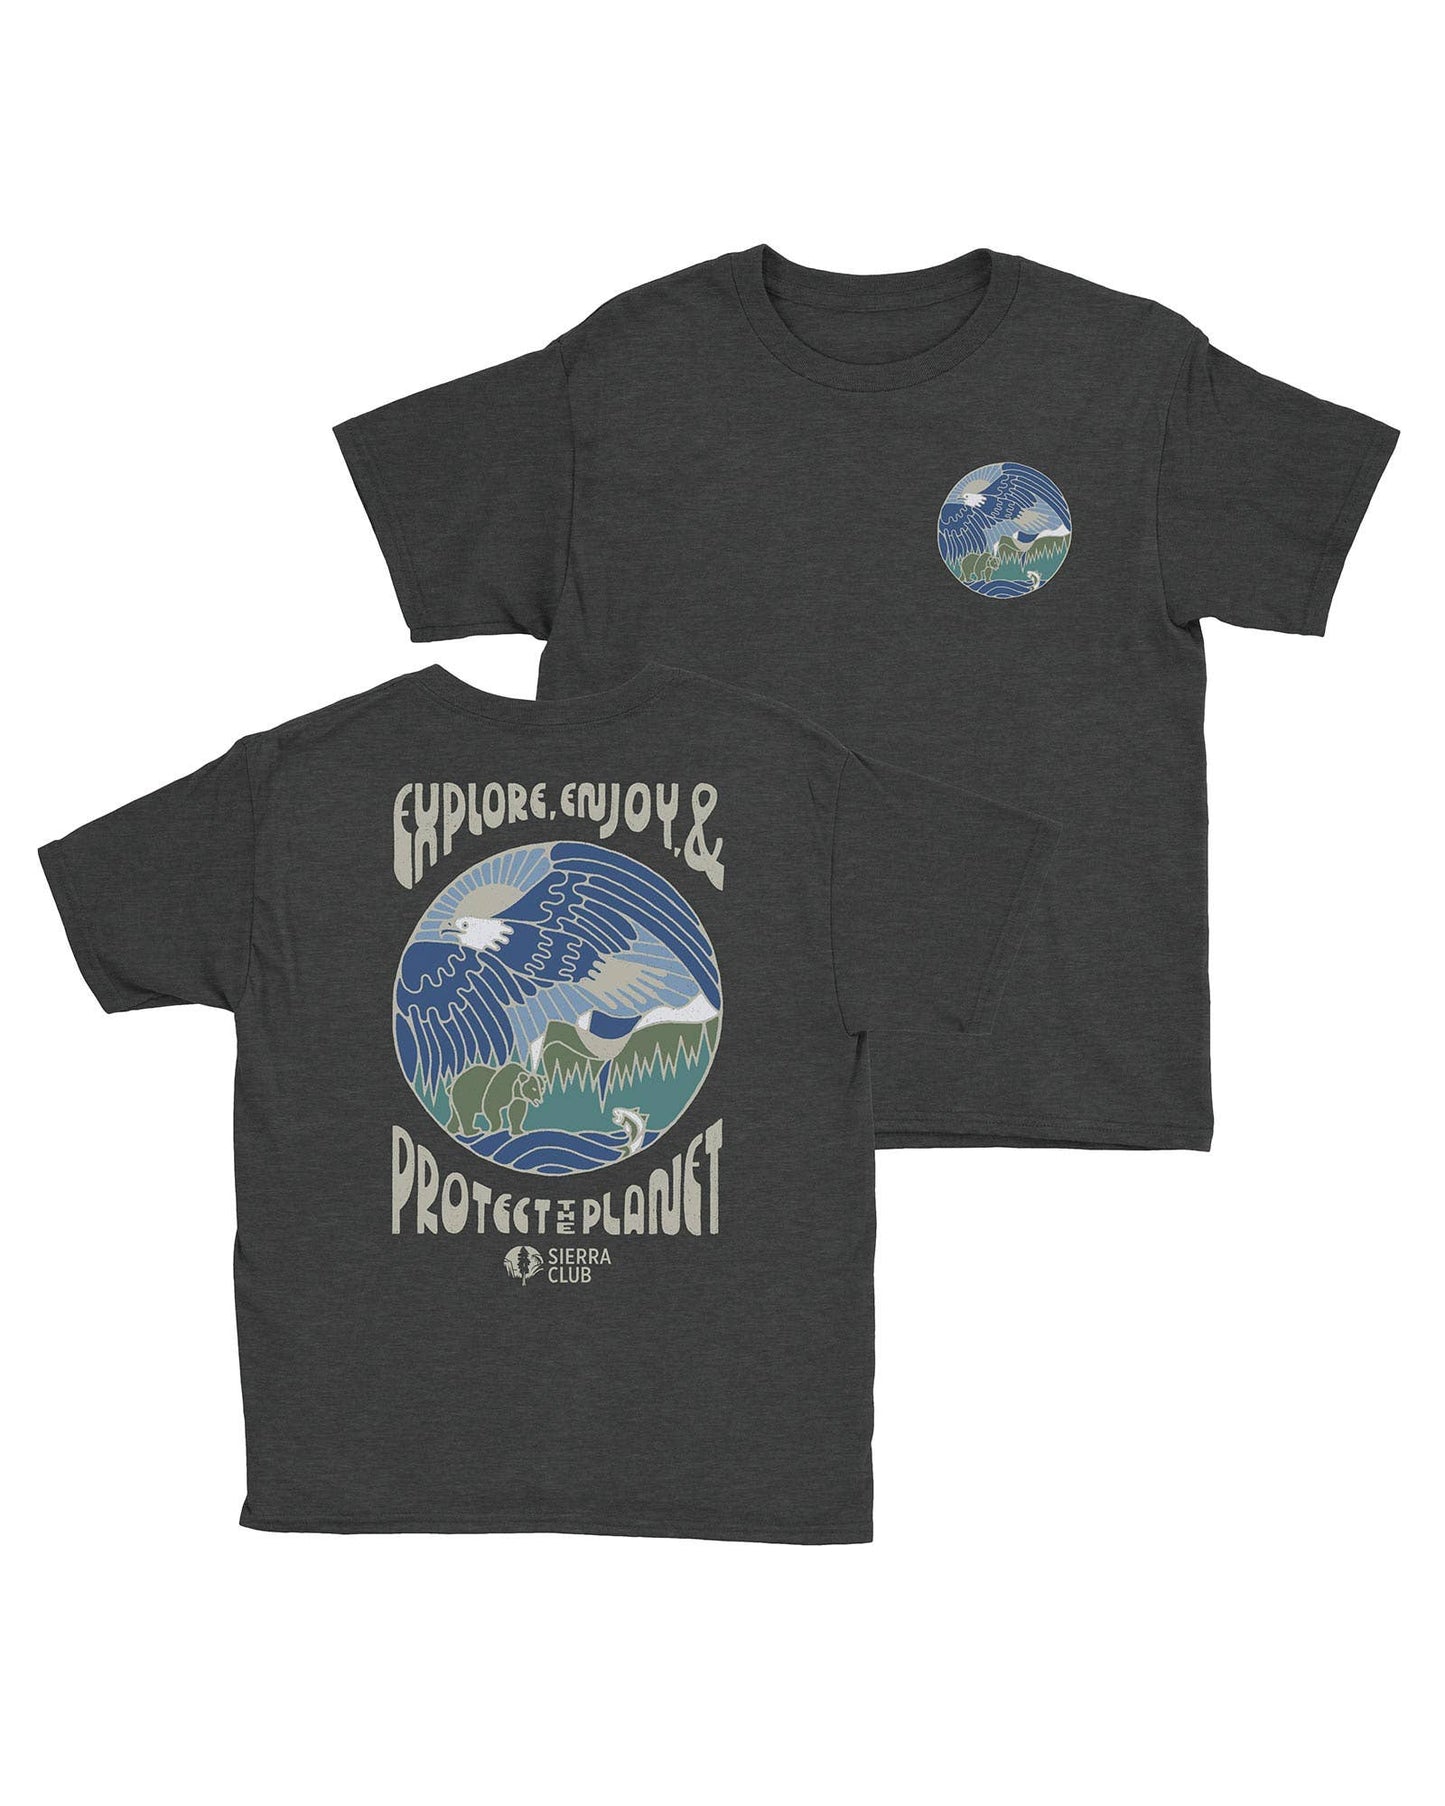 Sierra Club Dark Gray Youth Tee shirt with words Explore, Enjoy and Protect the Planet